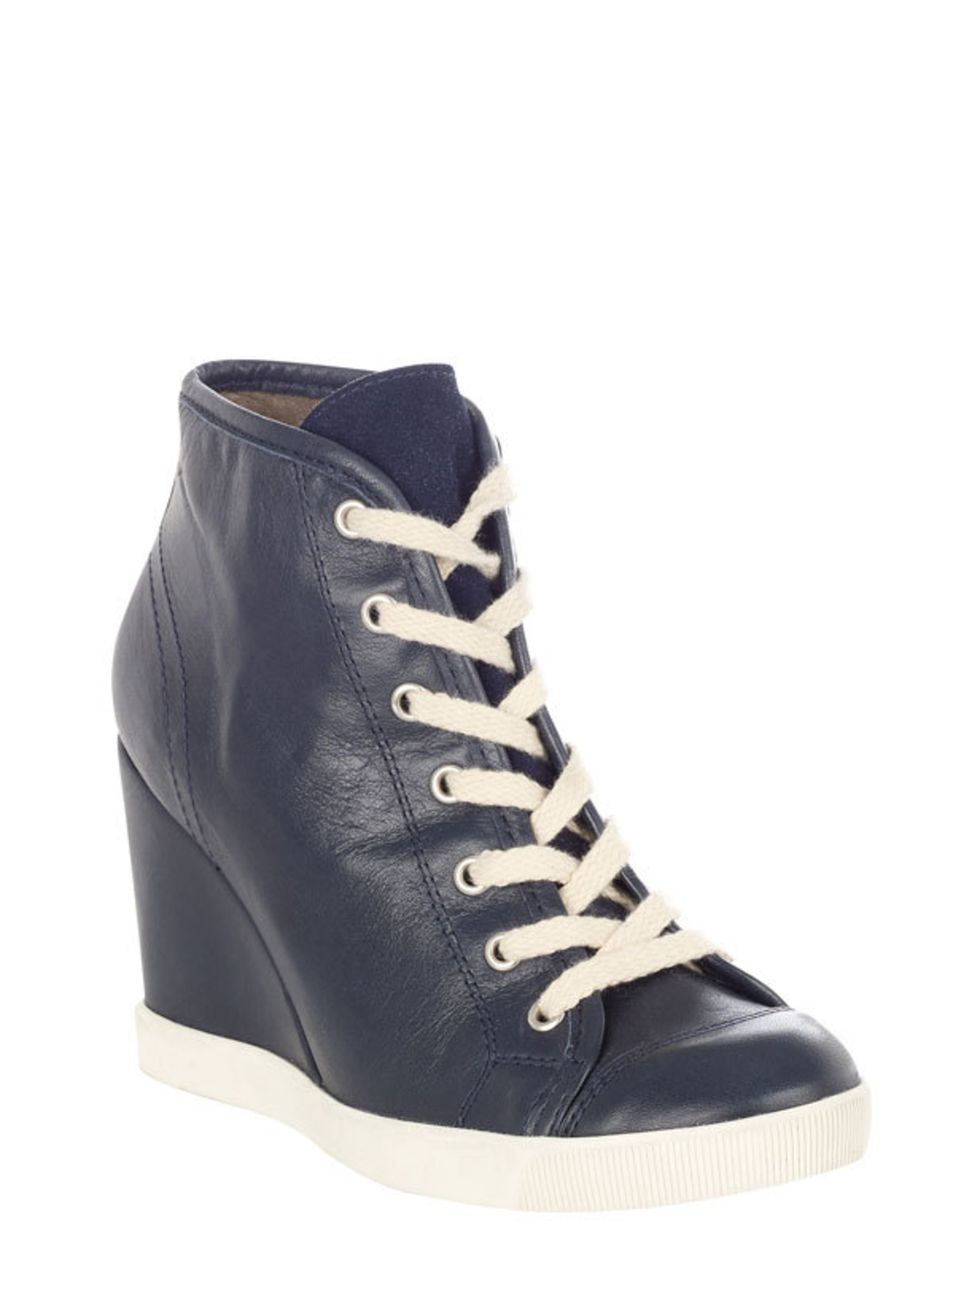 <p><a href="http://www.dune.co.uk/">Dune</a> leather wedge trainers, £115</p>